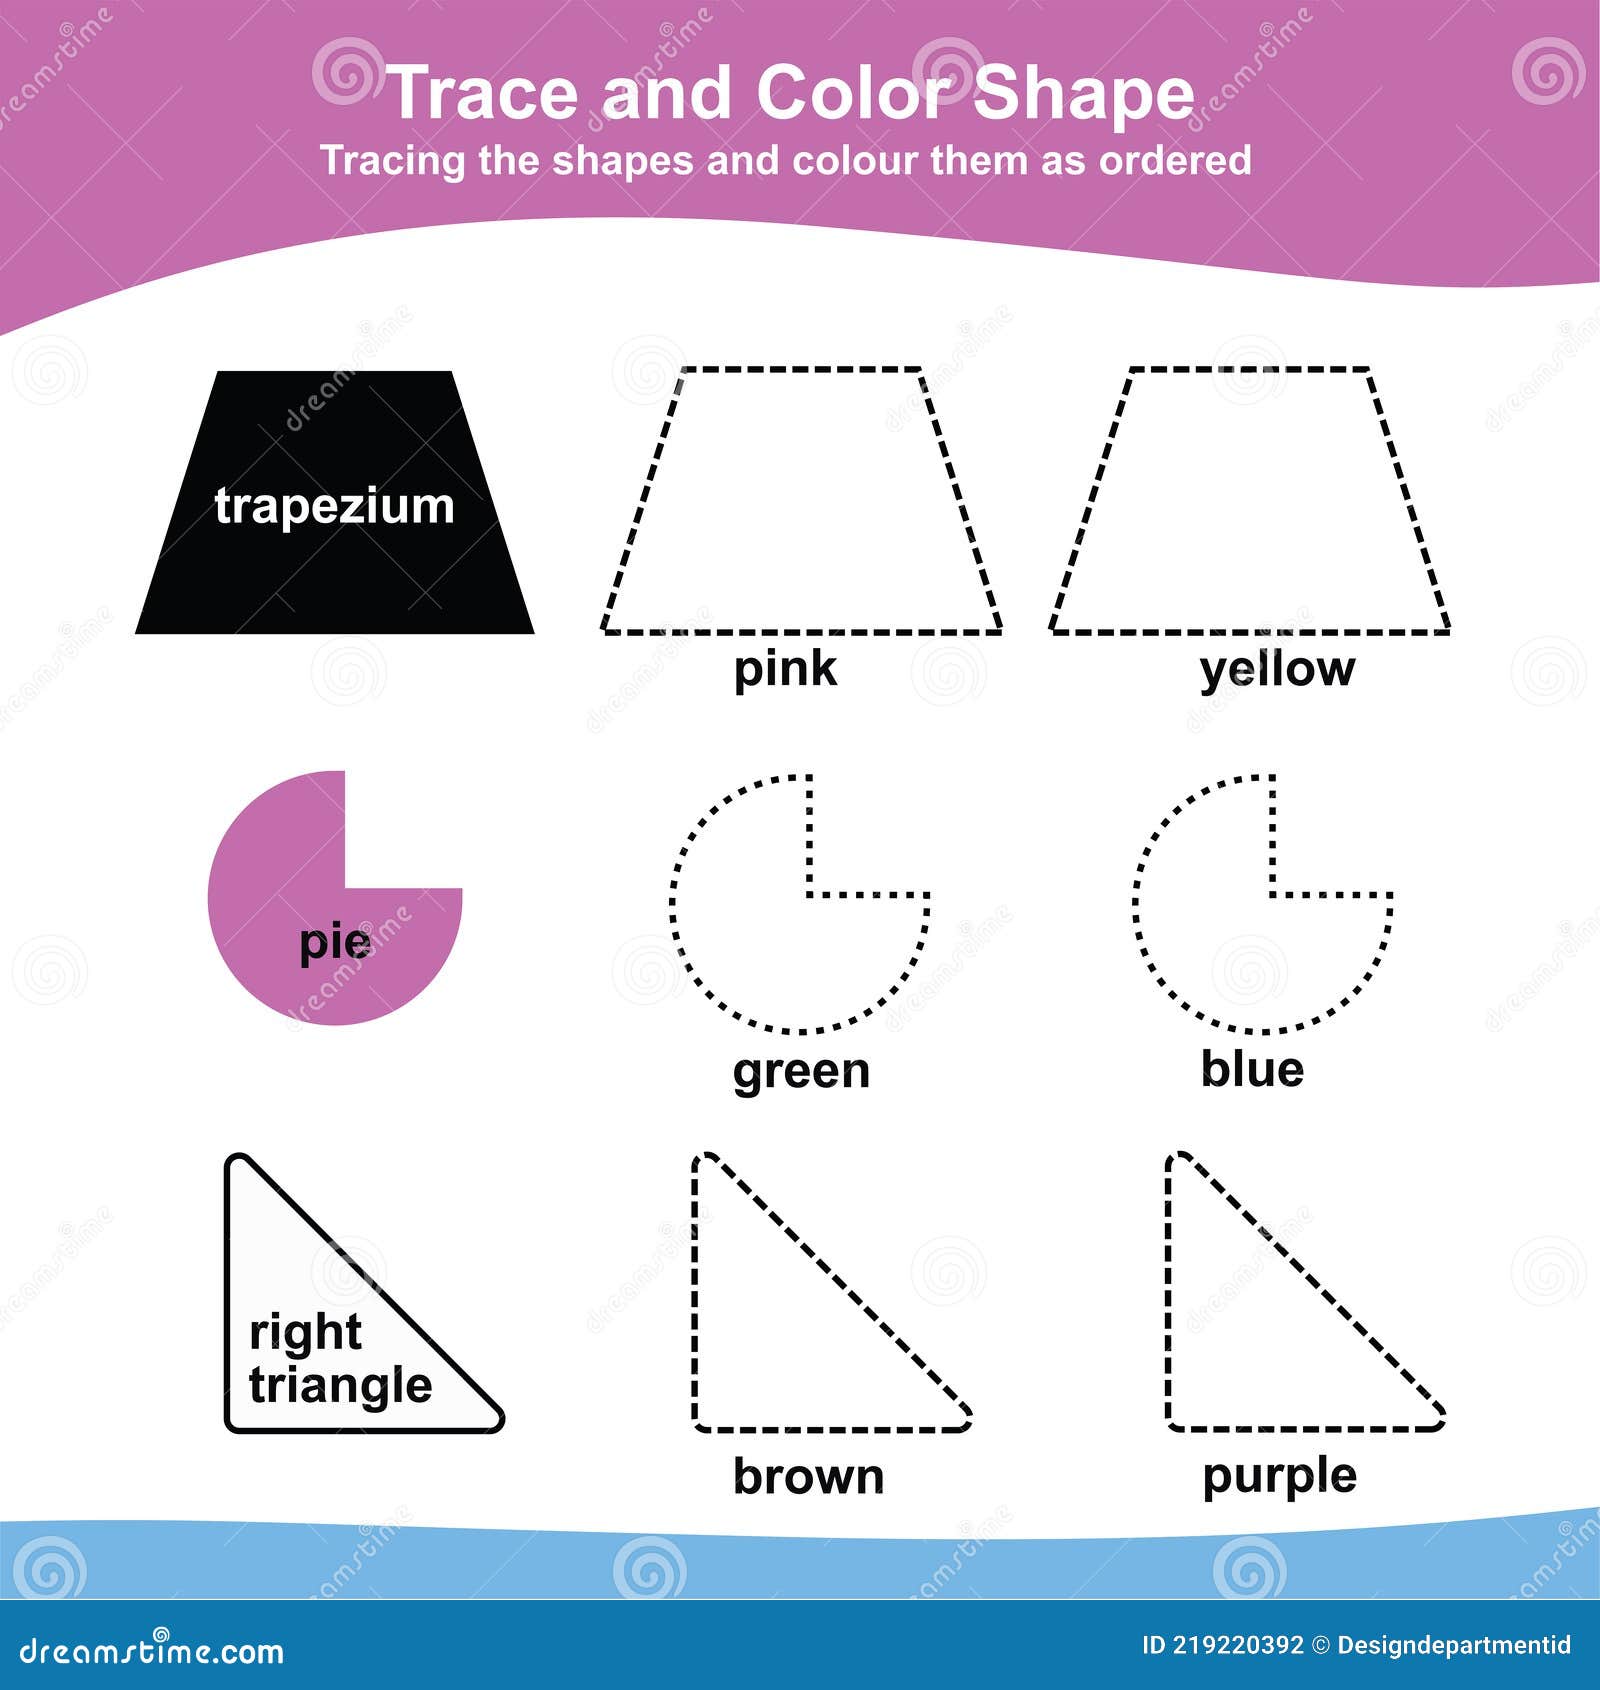 Tracing and coloring the shapes worksheet educational printable math worksheet additional coloring page for kids stock vector